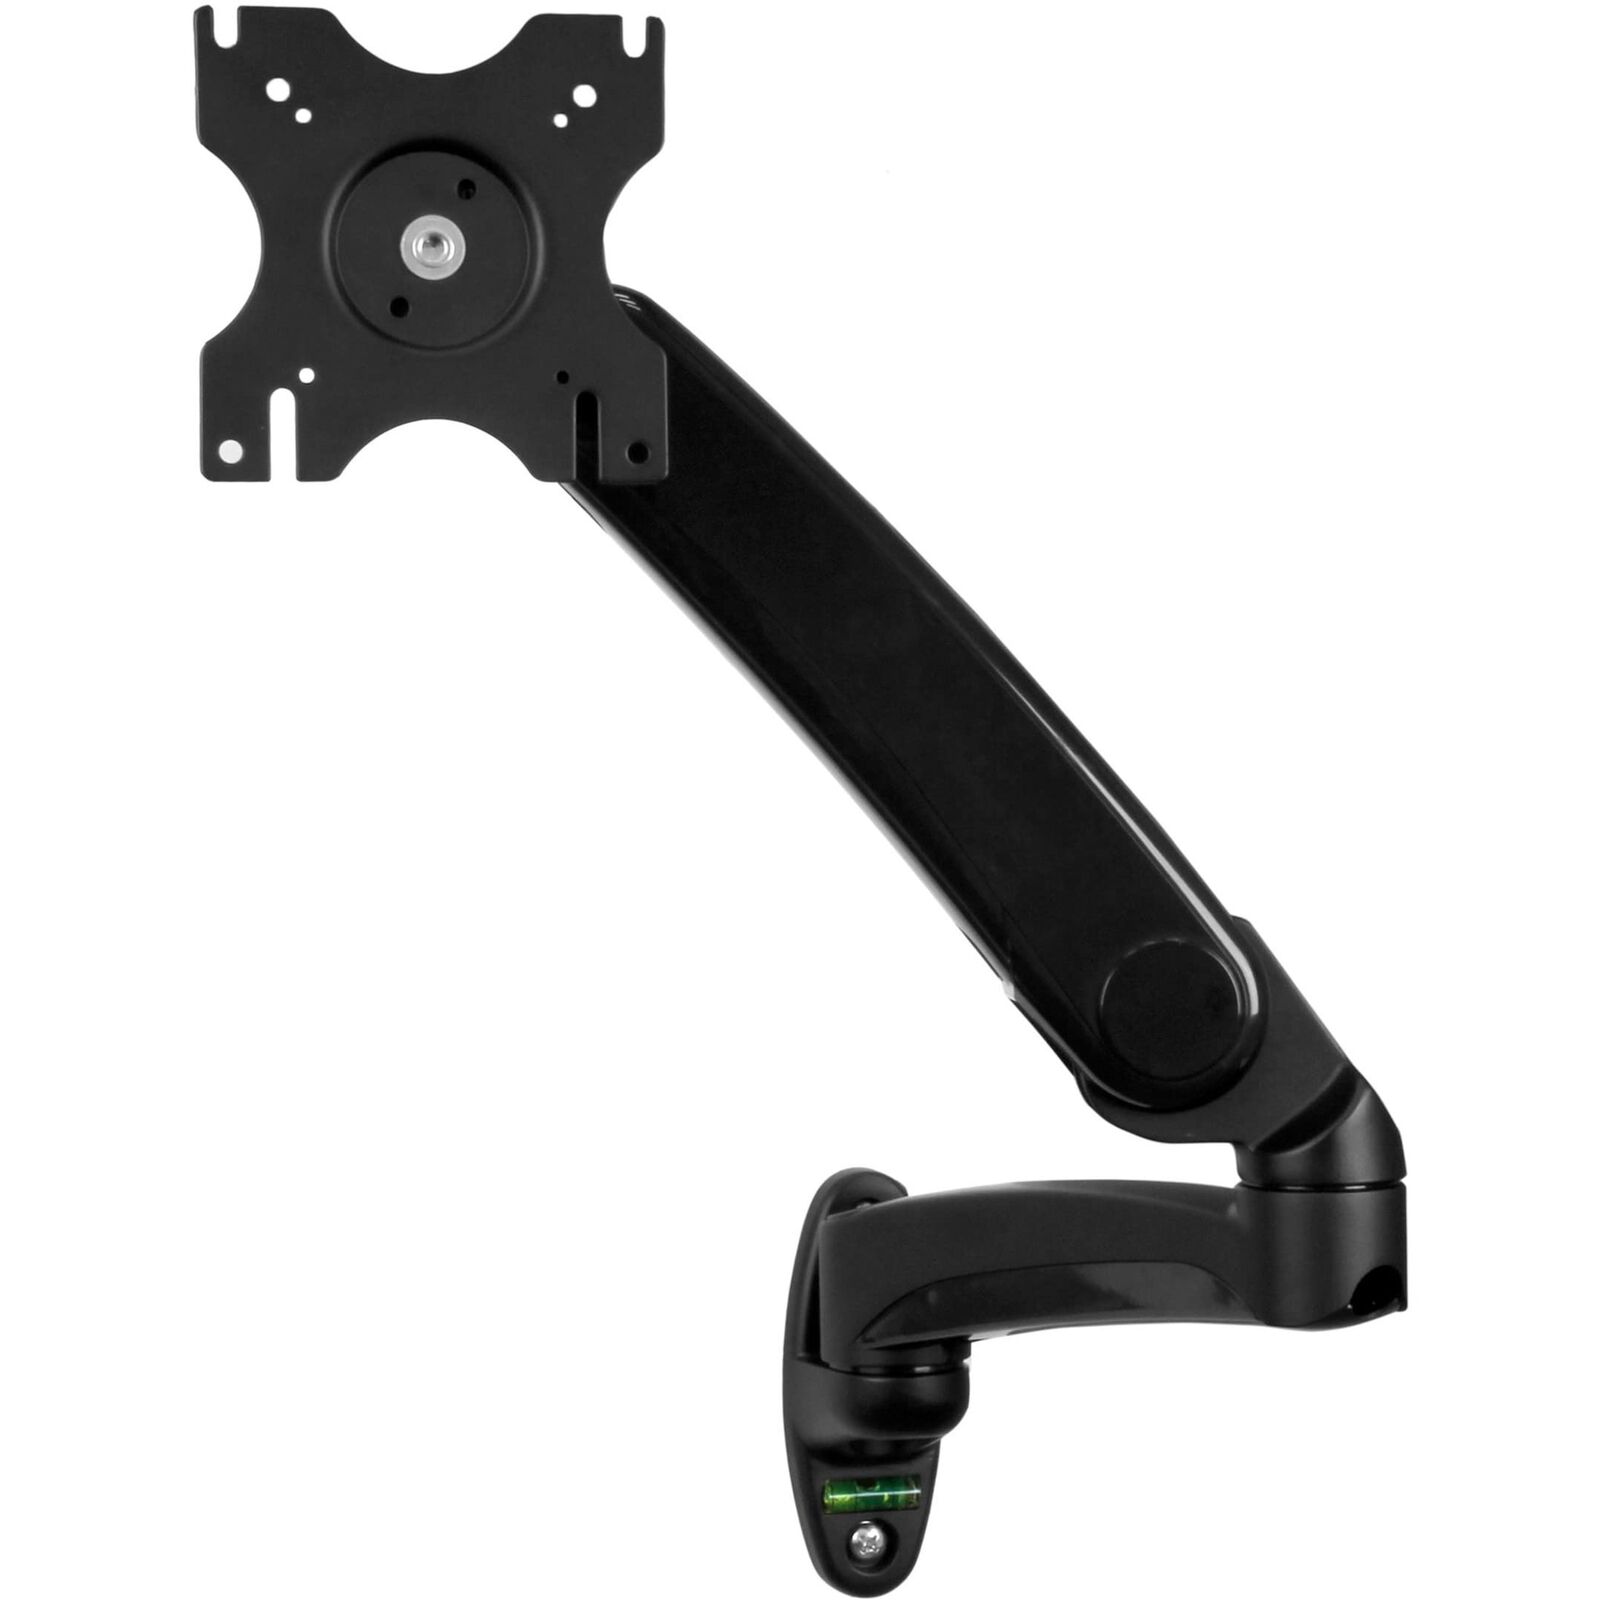 StarTech.com Wall Mount Monitor Arm - Full Motion Articulating - Adjustable